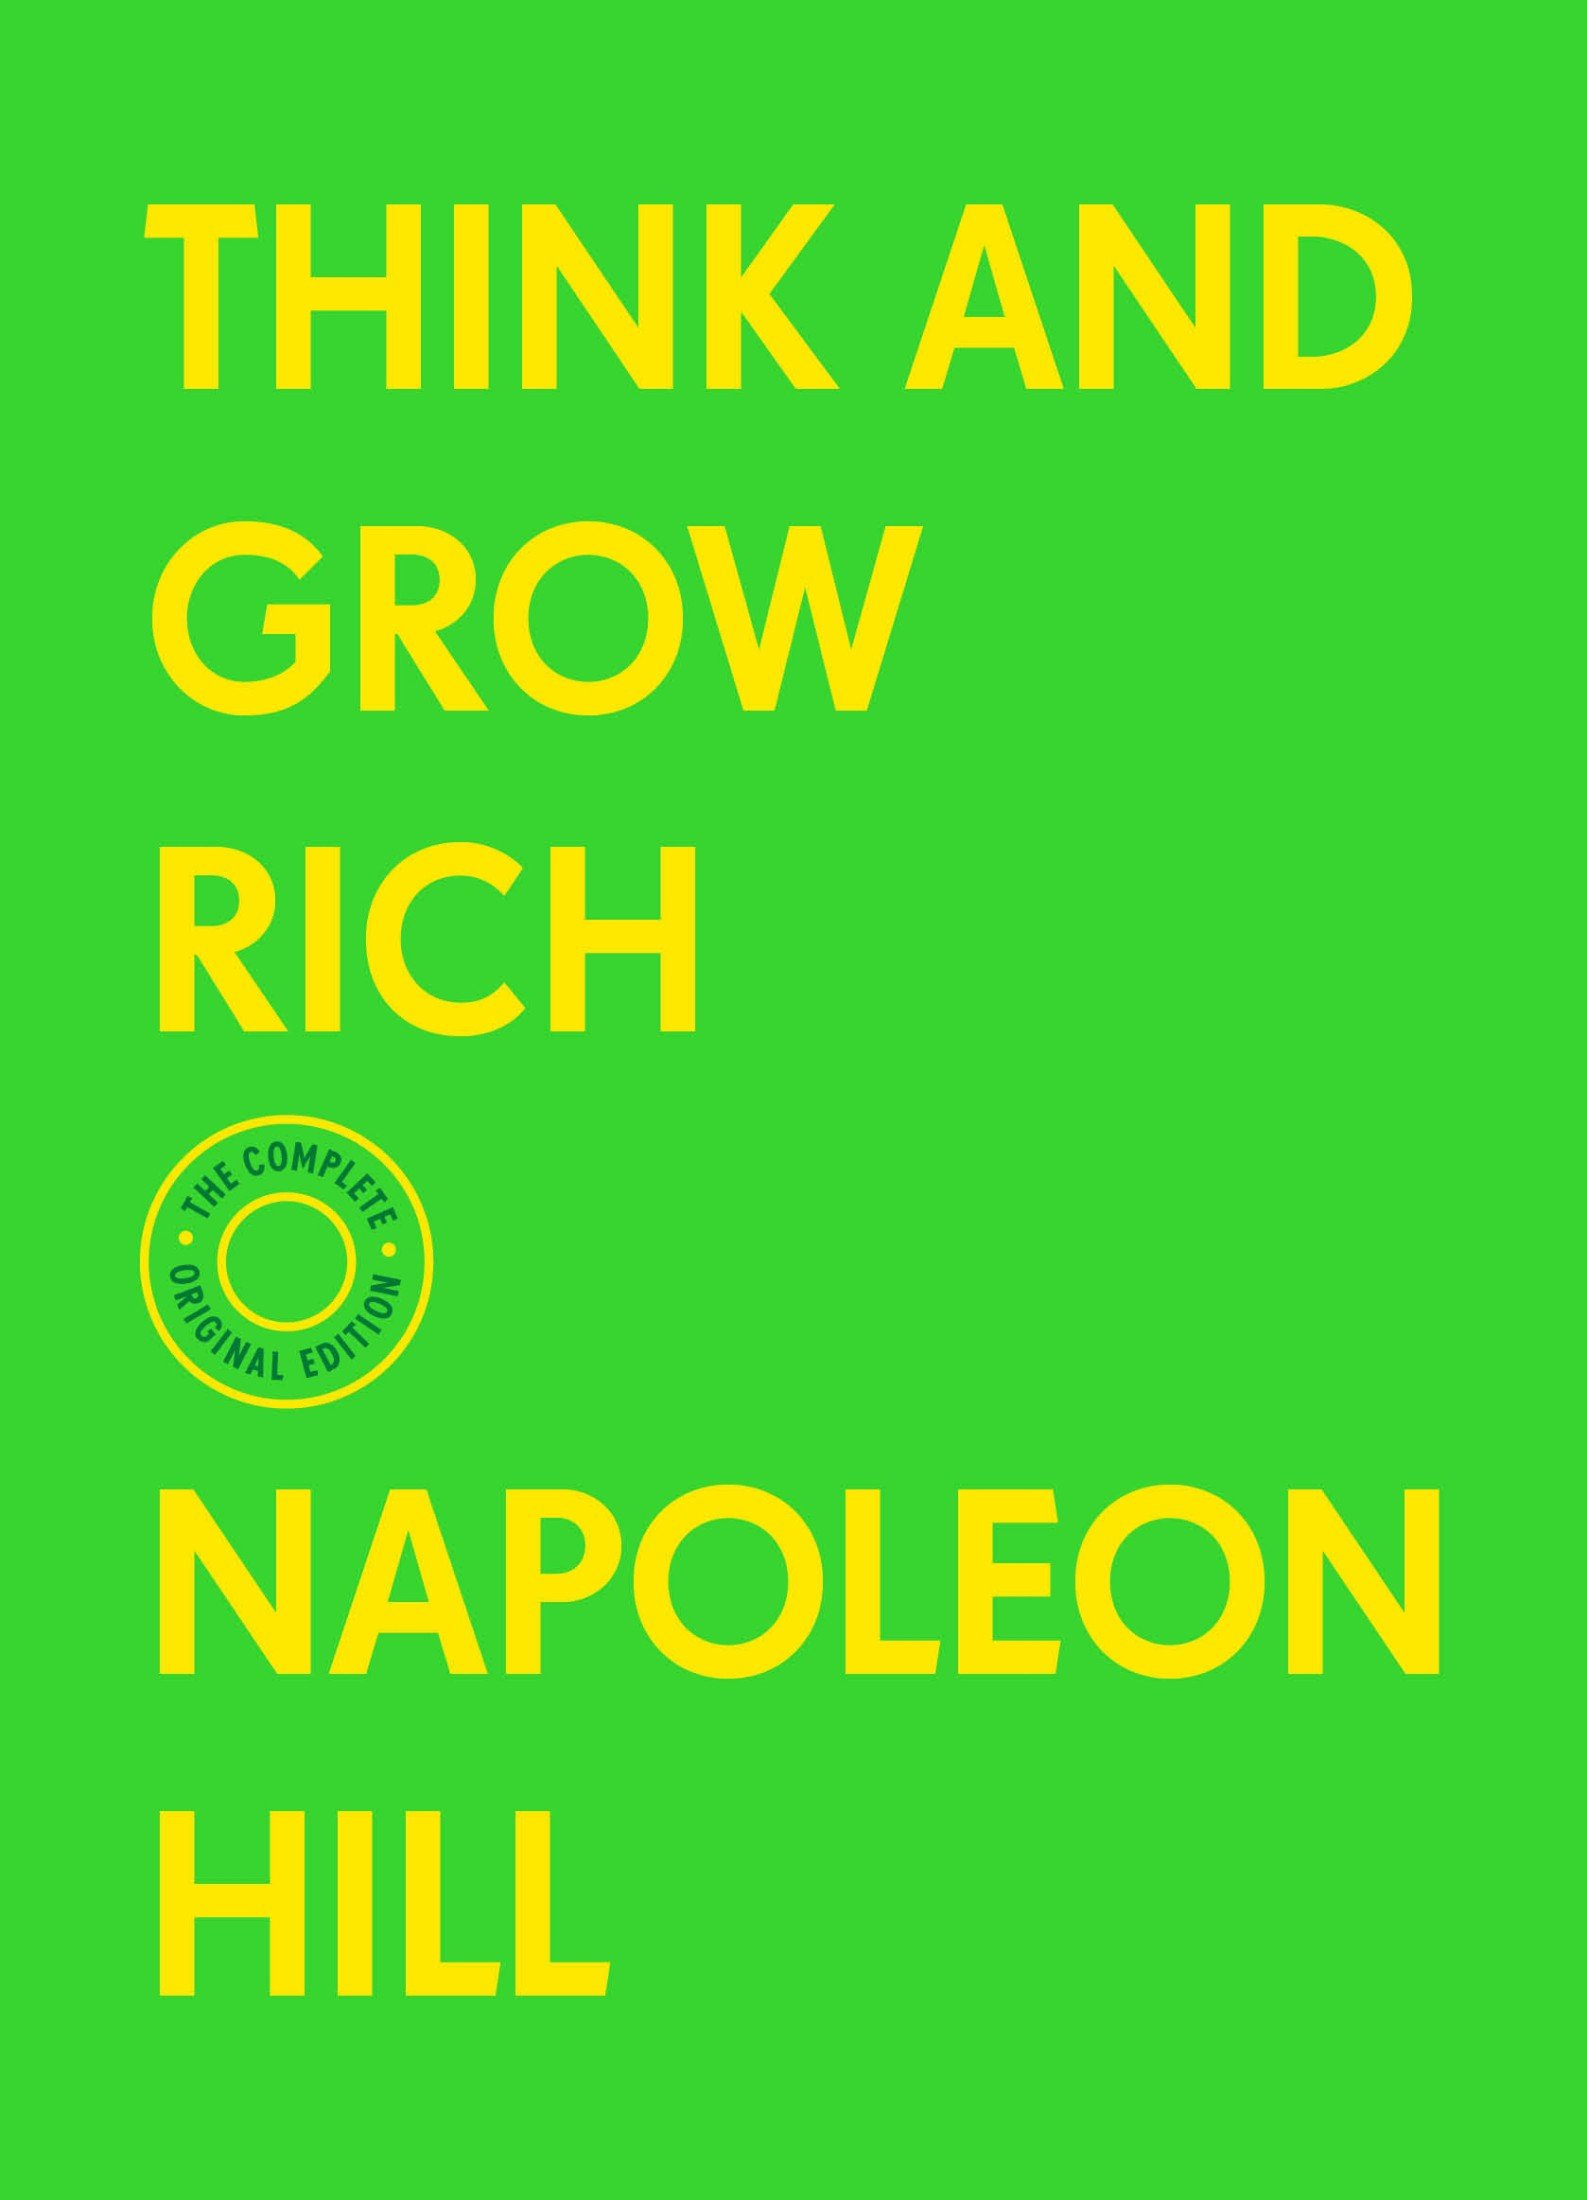 download the last version for apple Think and Grow Rich